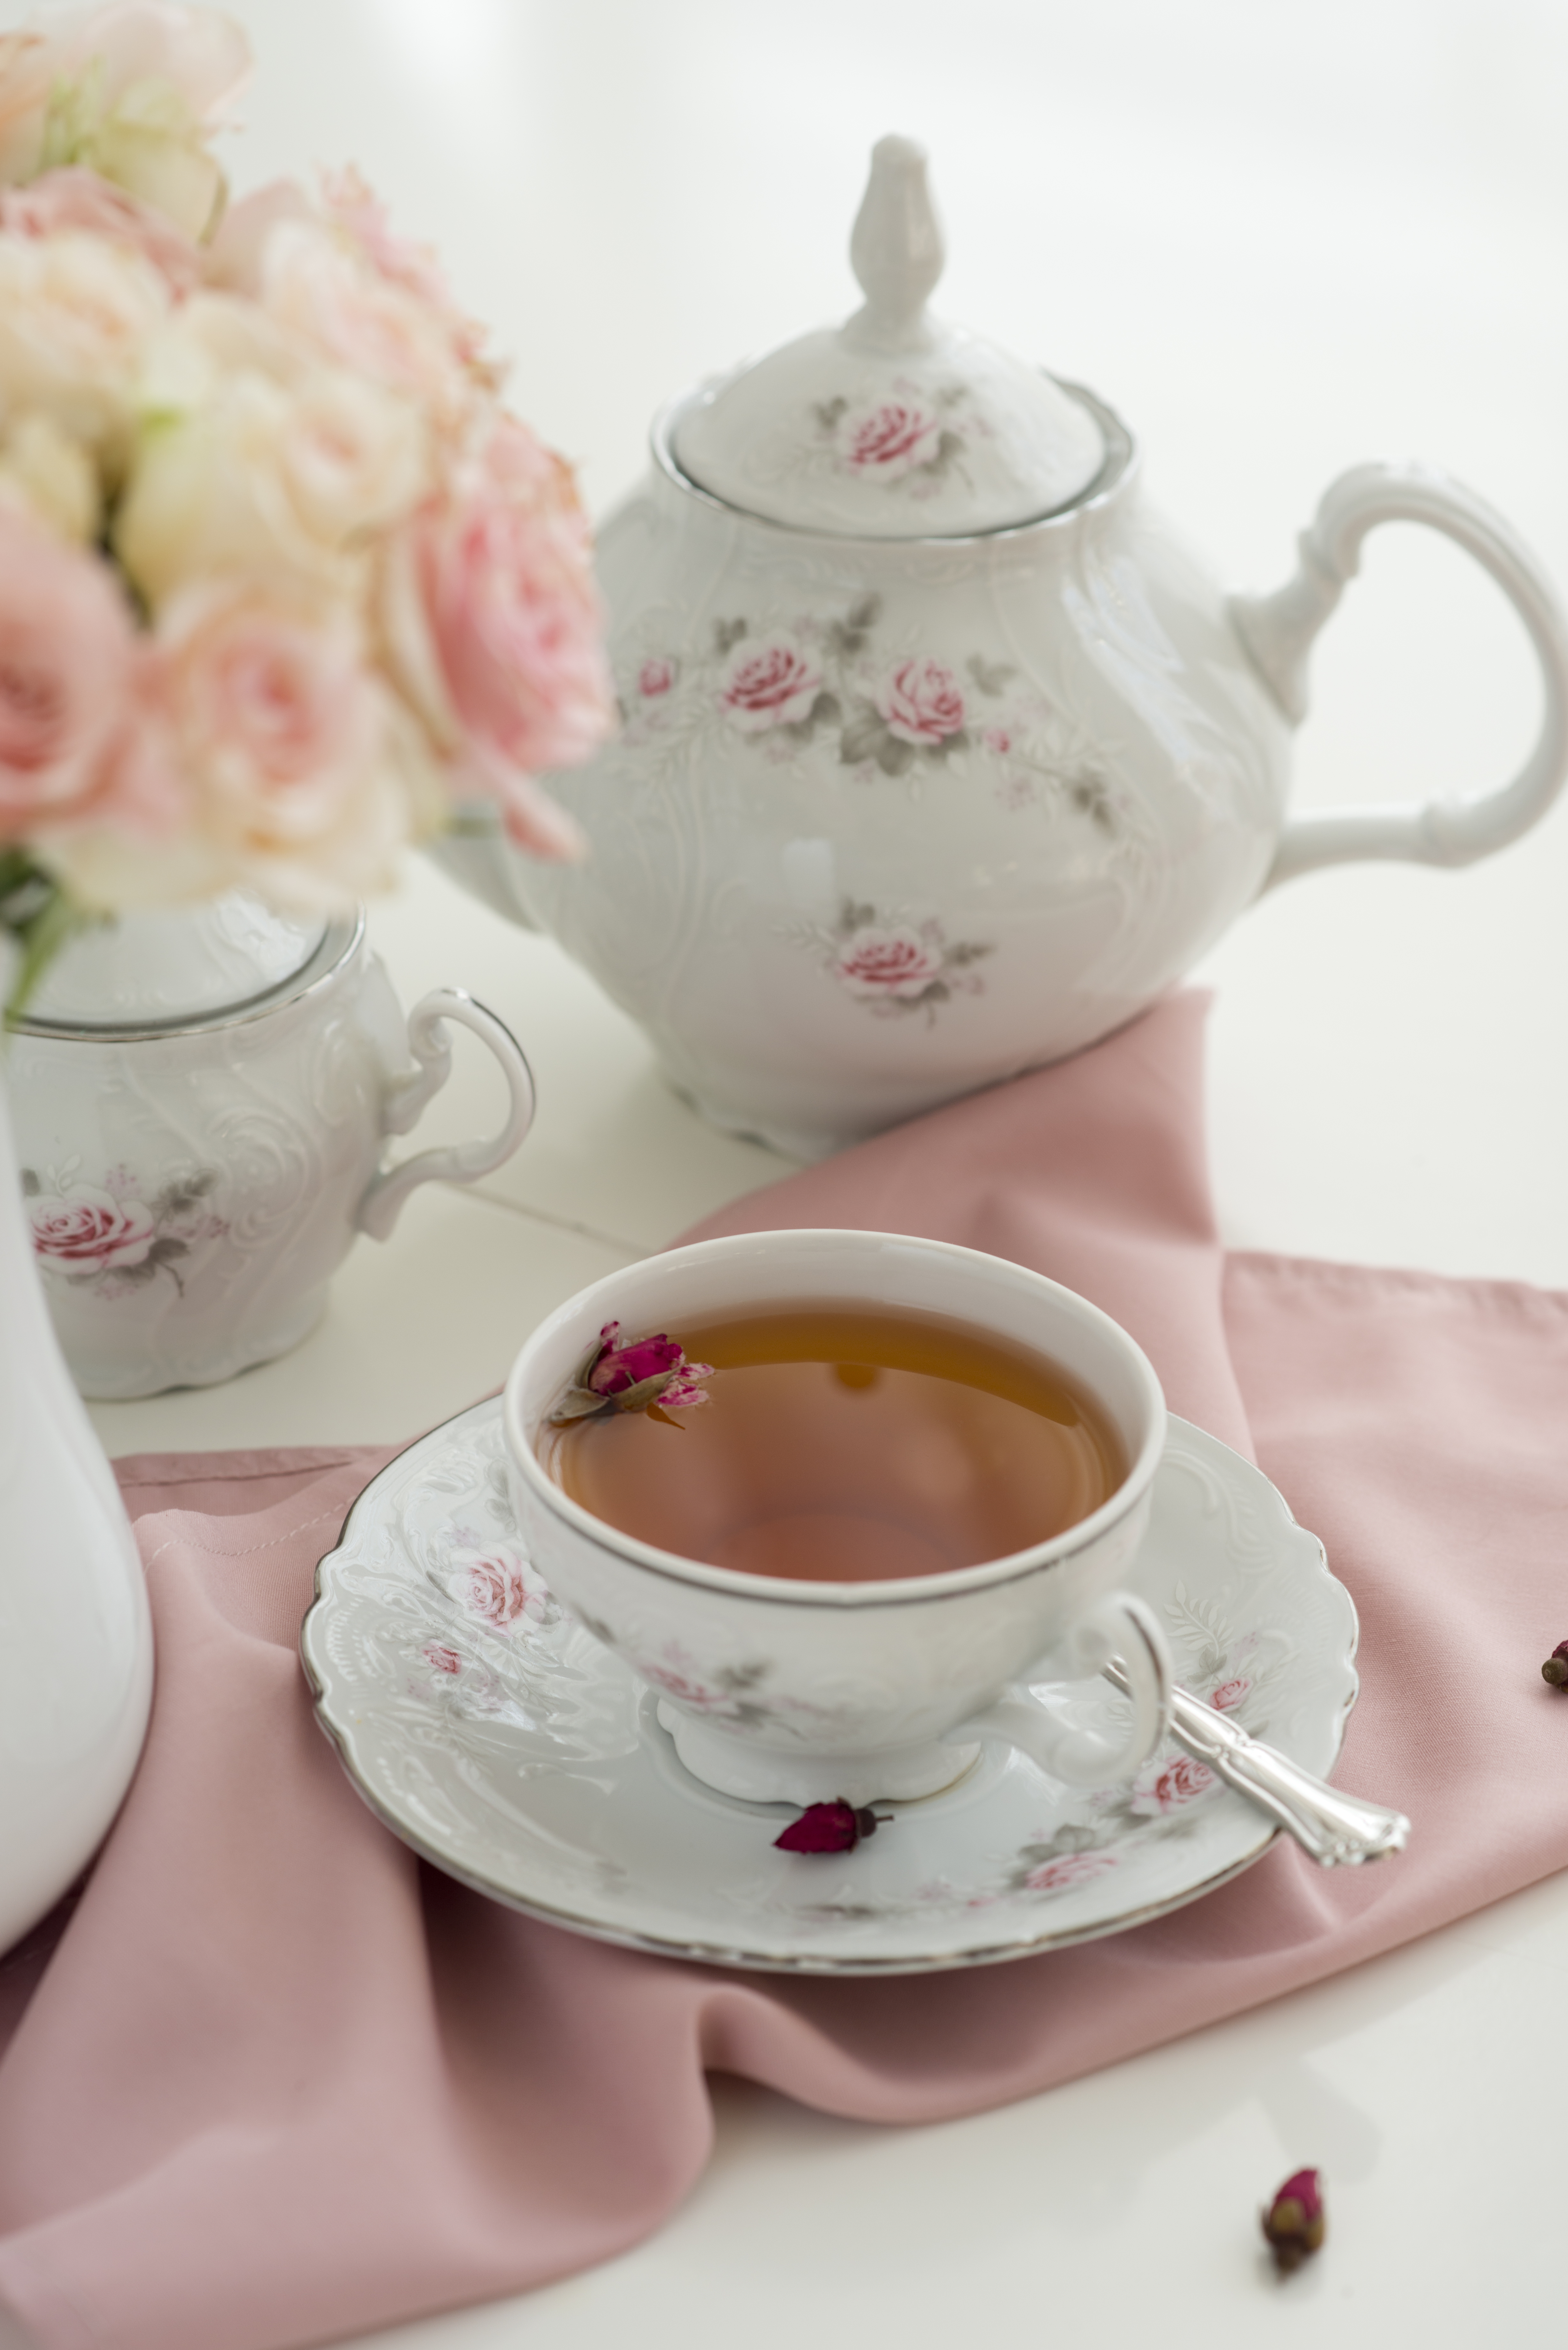 color photo of a pink and white tea set with a full cup of tea and a vase of roses